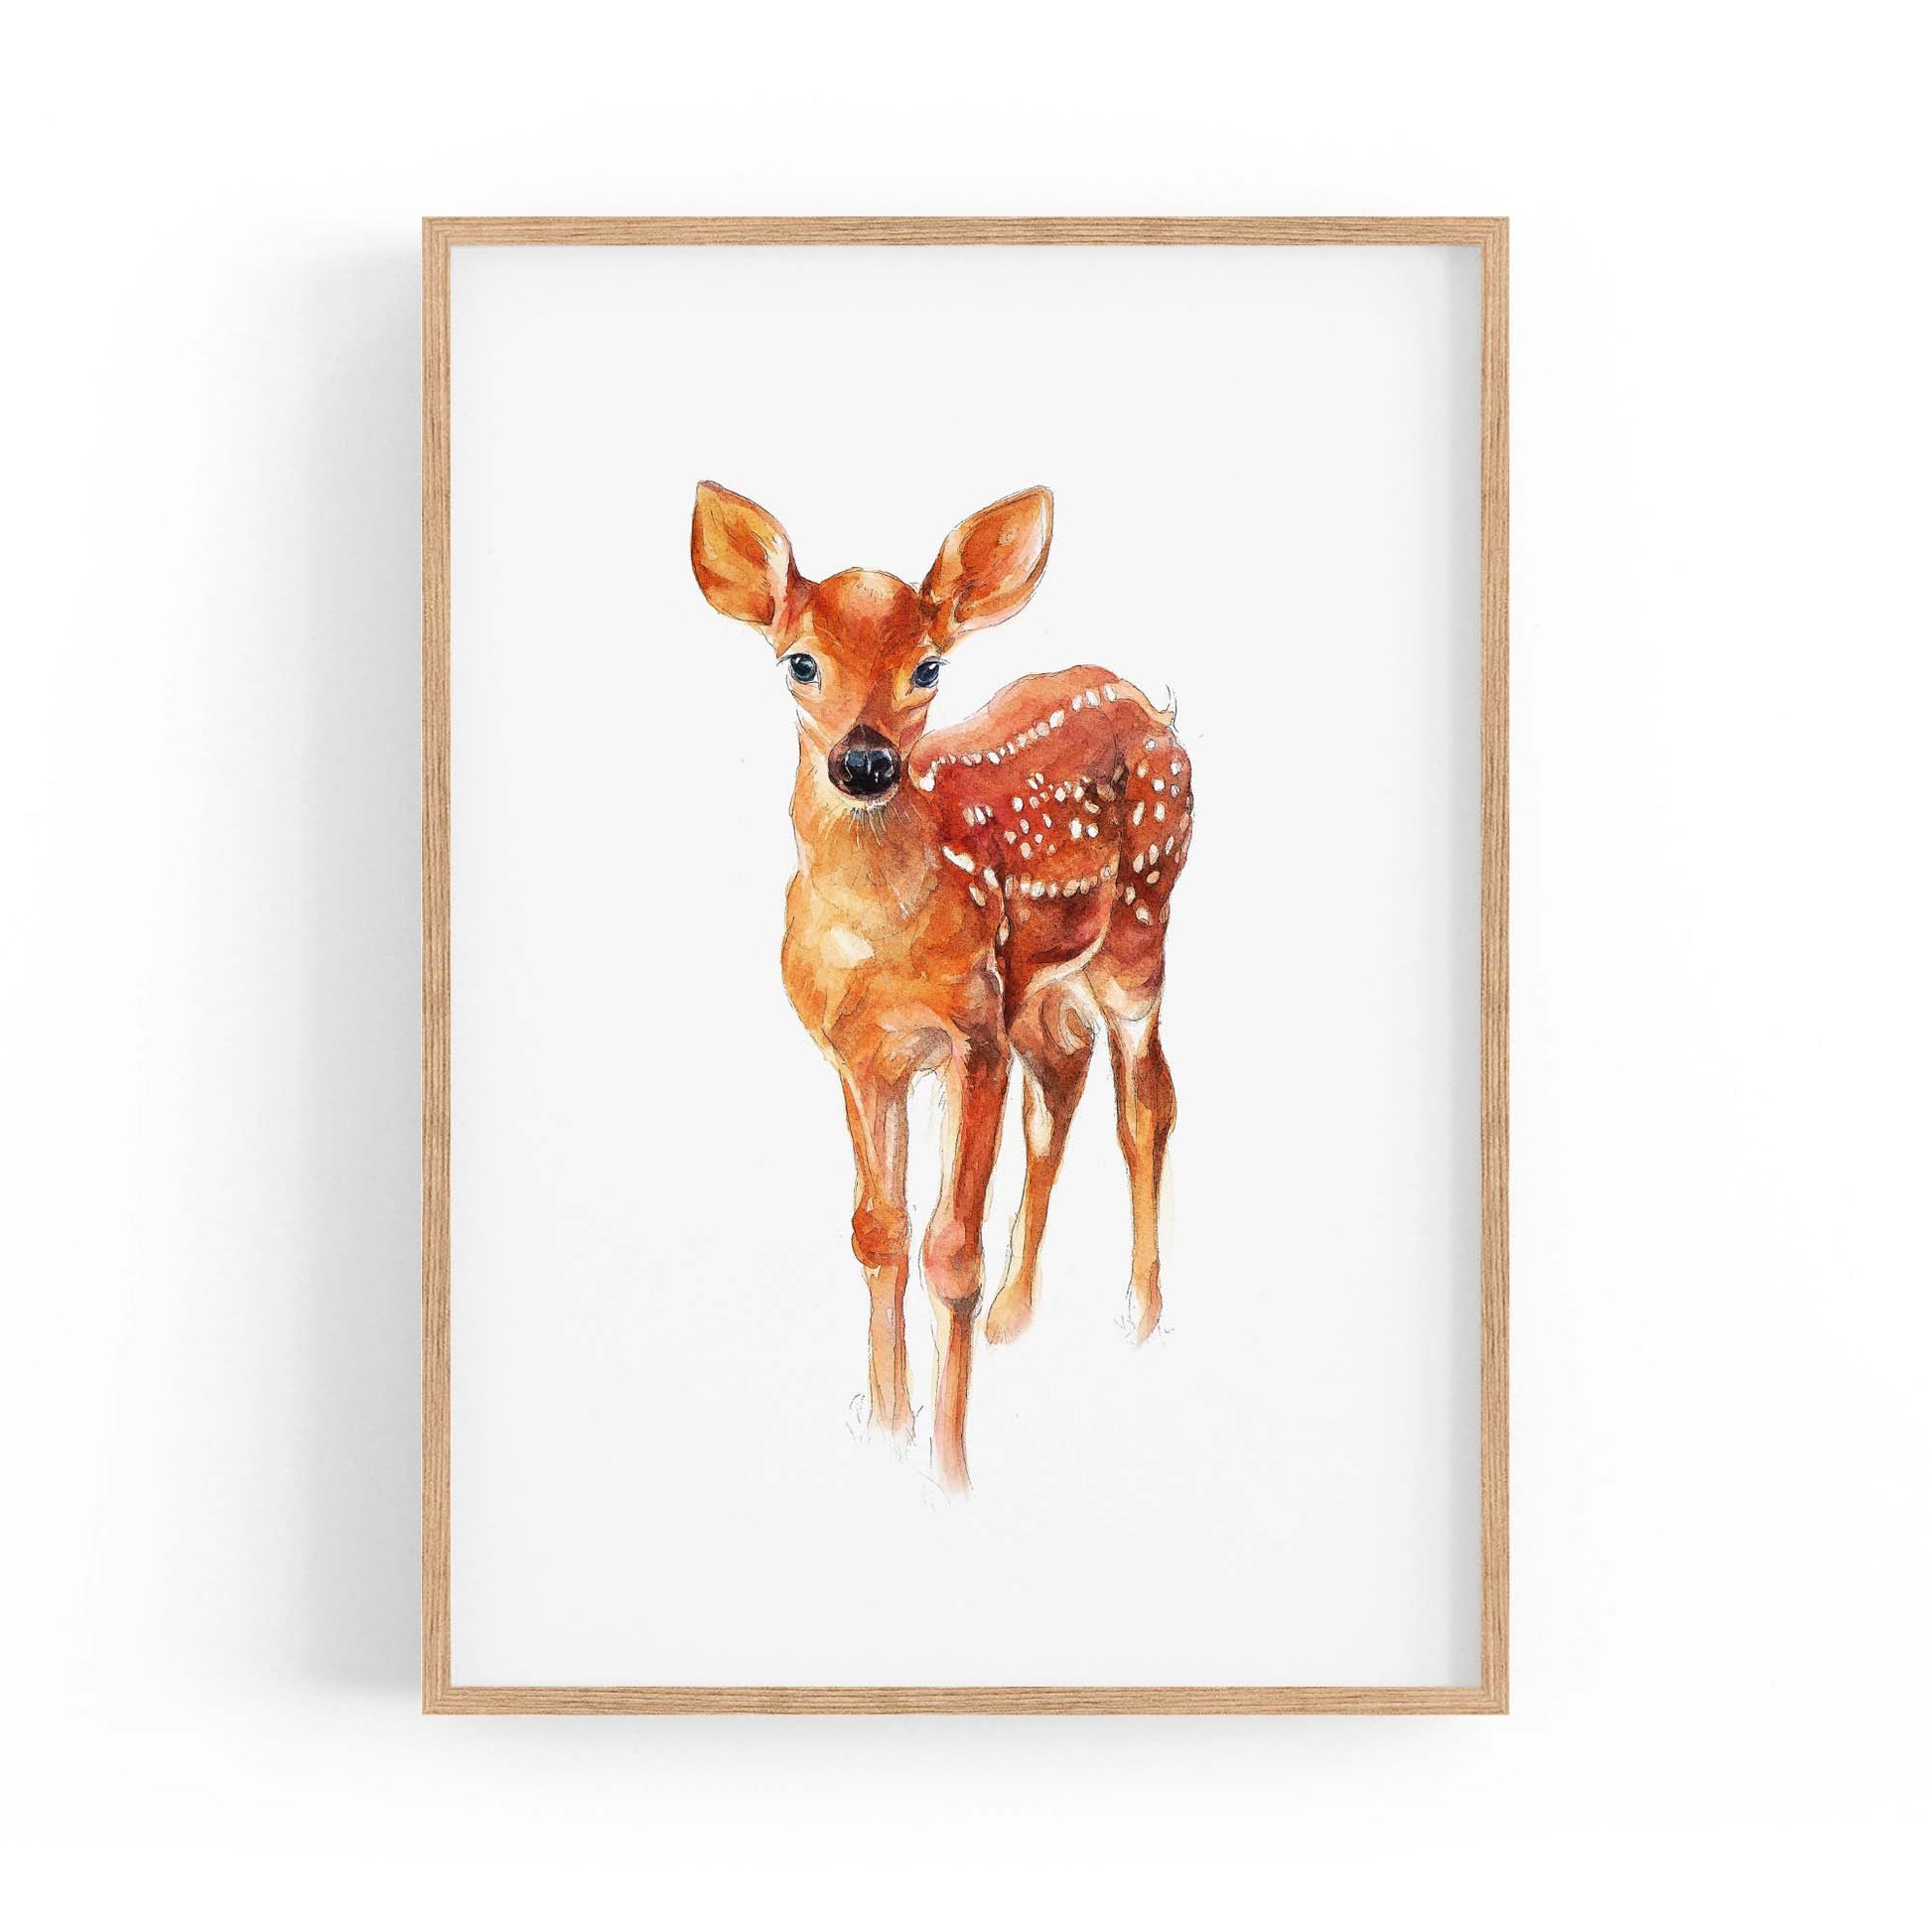 Watercolour Deer Painting Animal Nursery Wall Art - The Affordable Art Company